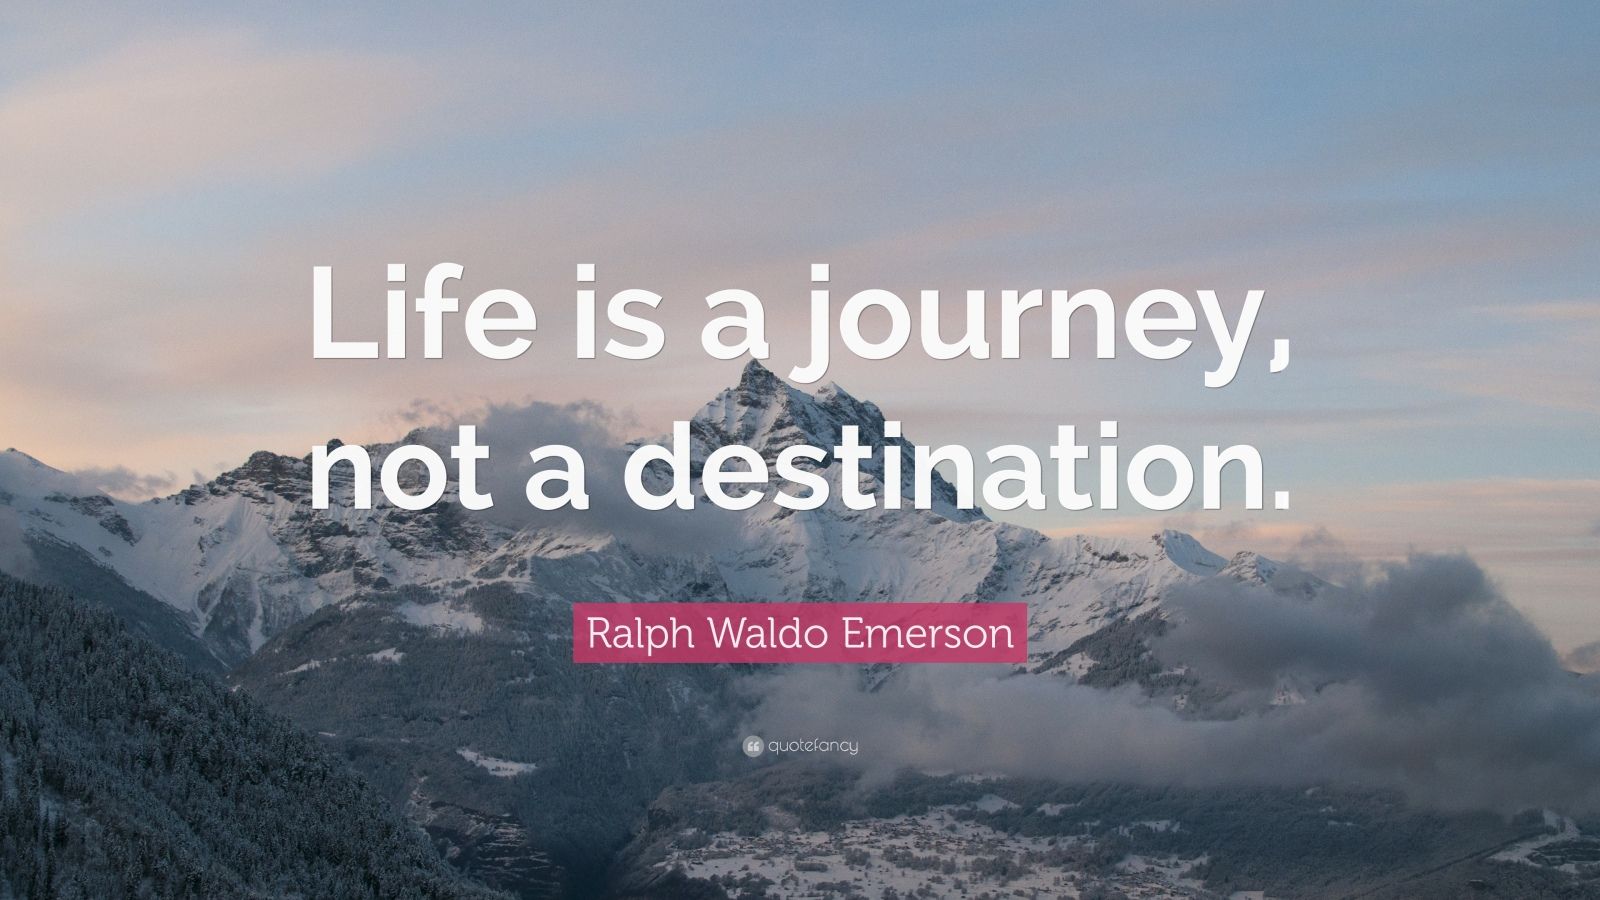 Ralph Waldo Emerson Quote: "Life is a journey, not a ...